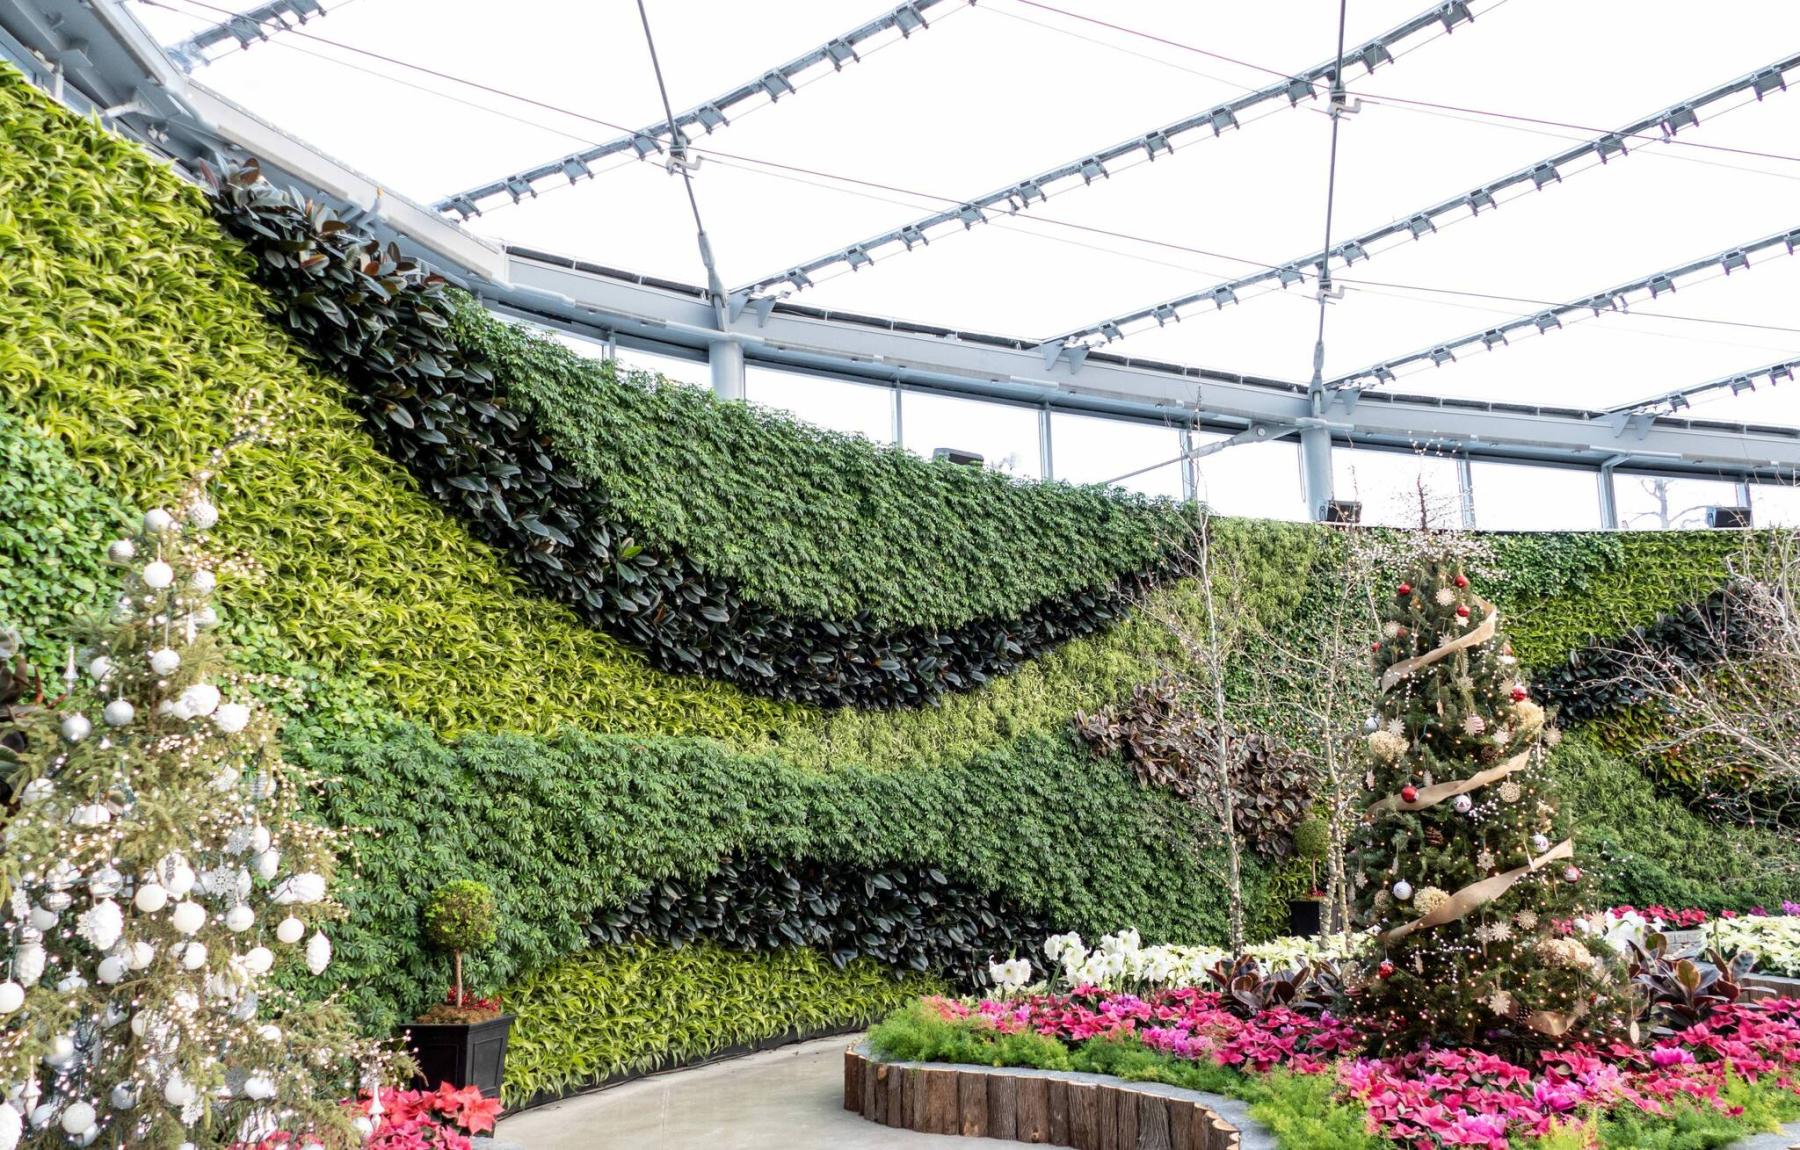  <p>Darlene Stack</p>
                                <p>The green wall in the Babs Asper Display House at The Leaf is one of the largest indoor living walls in Canada.</p> 